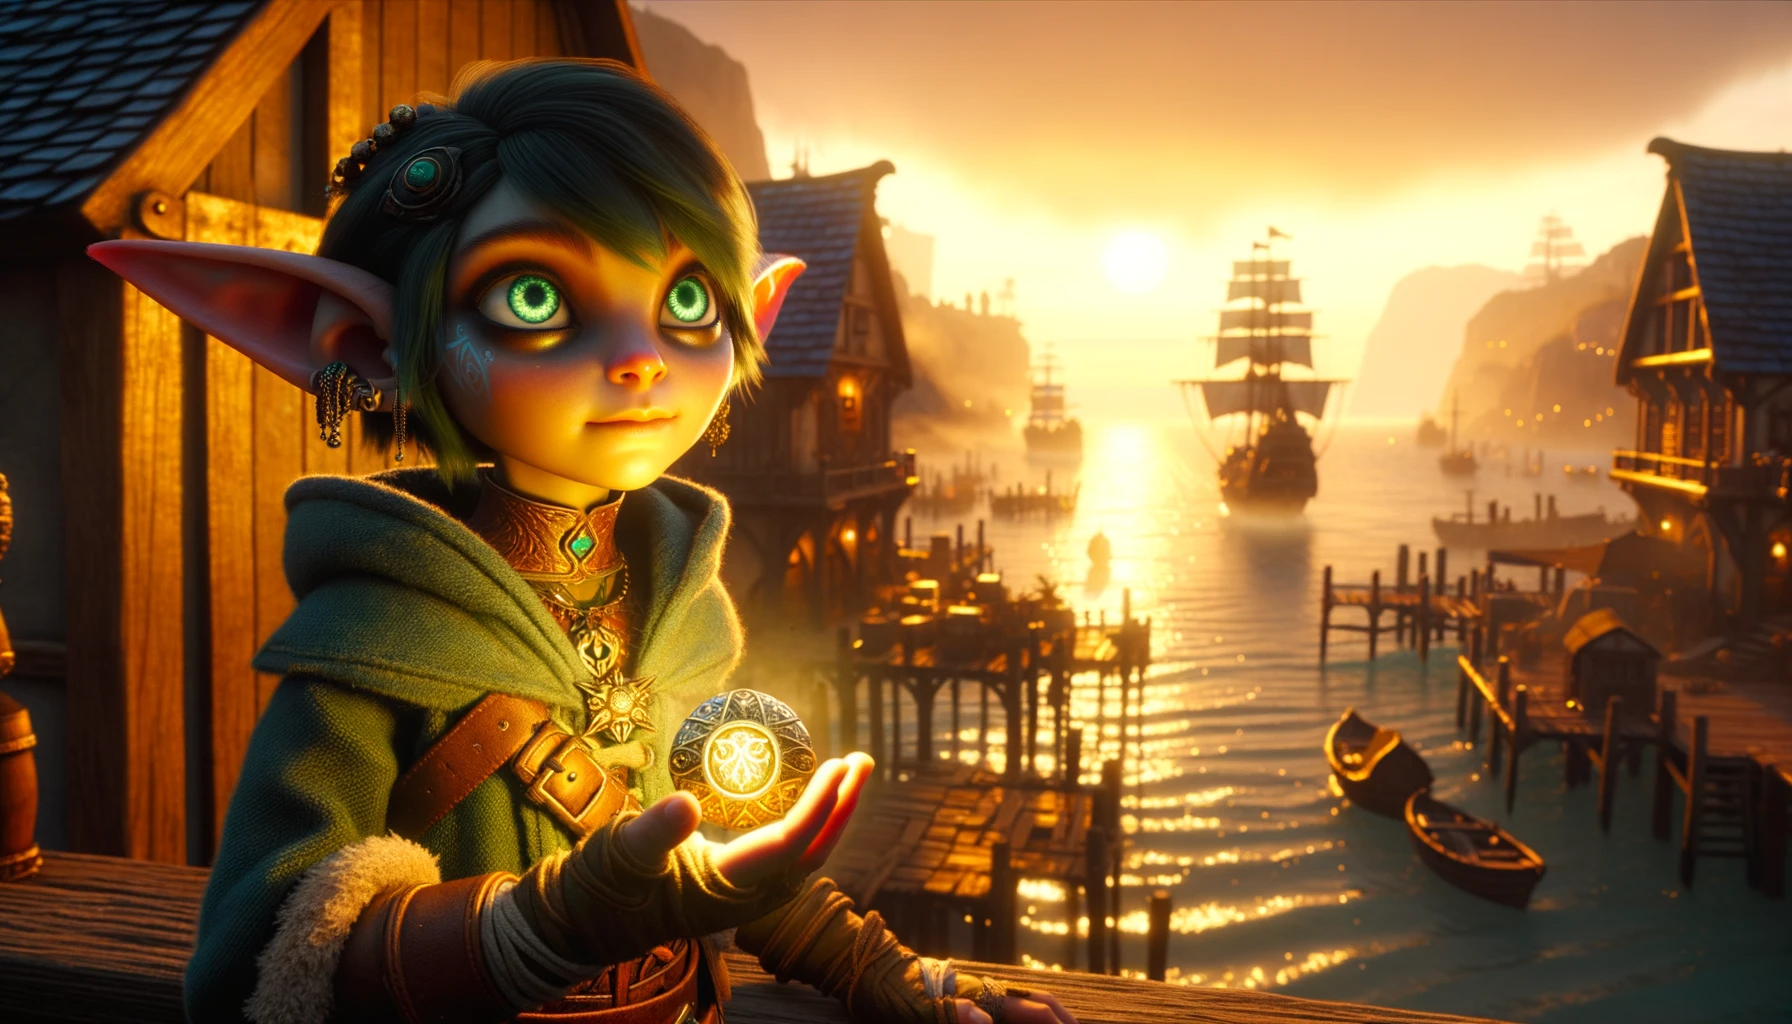 dawn breaks over Bilgewater Harbor, with Glim standing determinedly outside her shop, clutching the glowing amulet. This marks the beginning of her legendary journey to become Glowstitch.